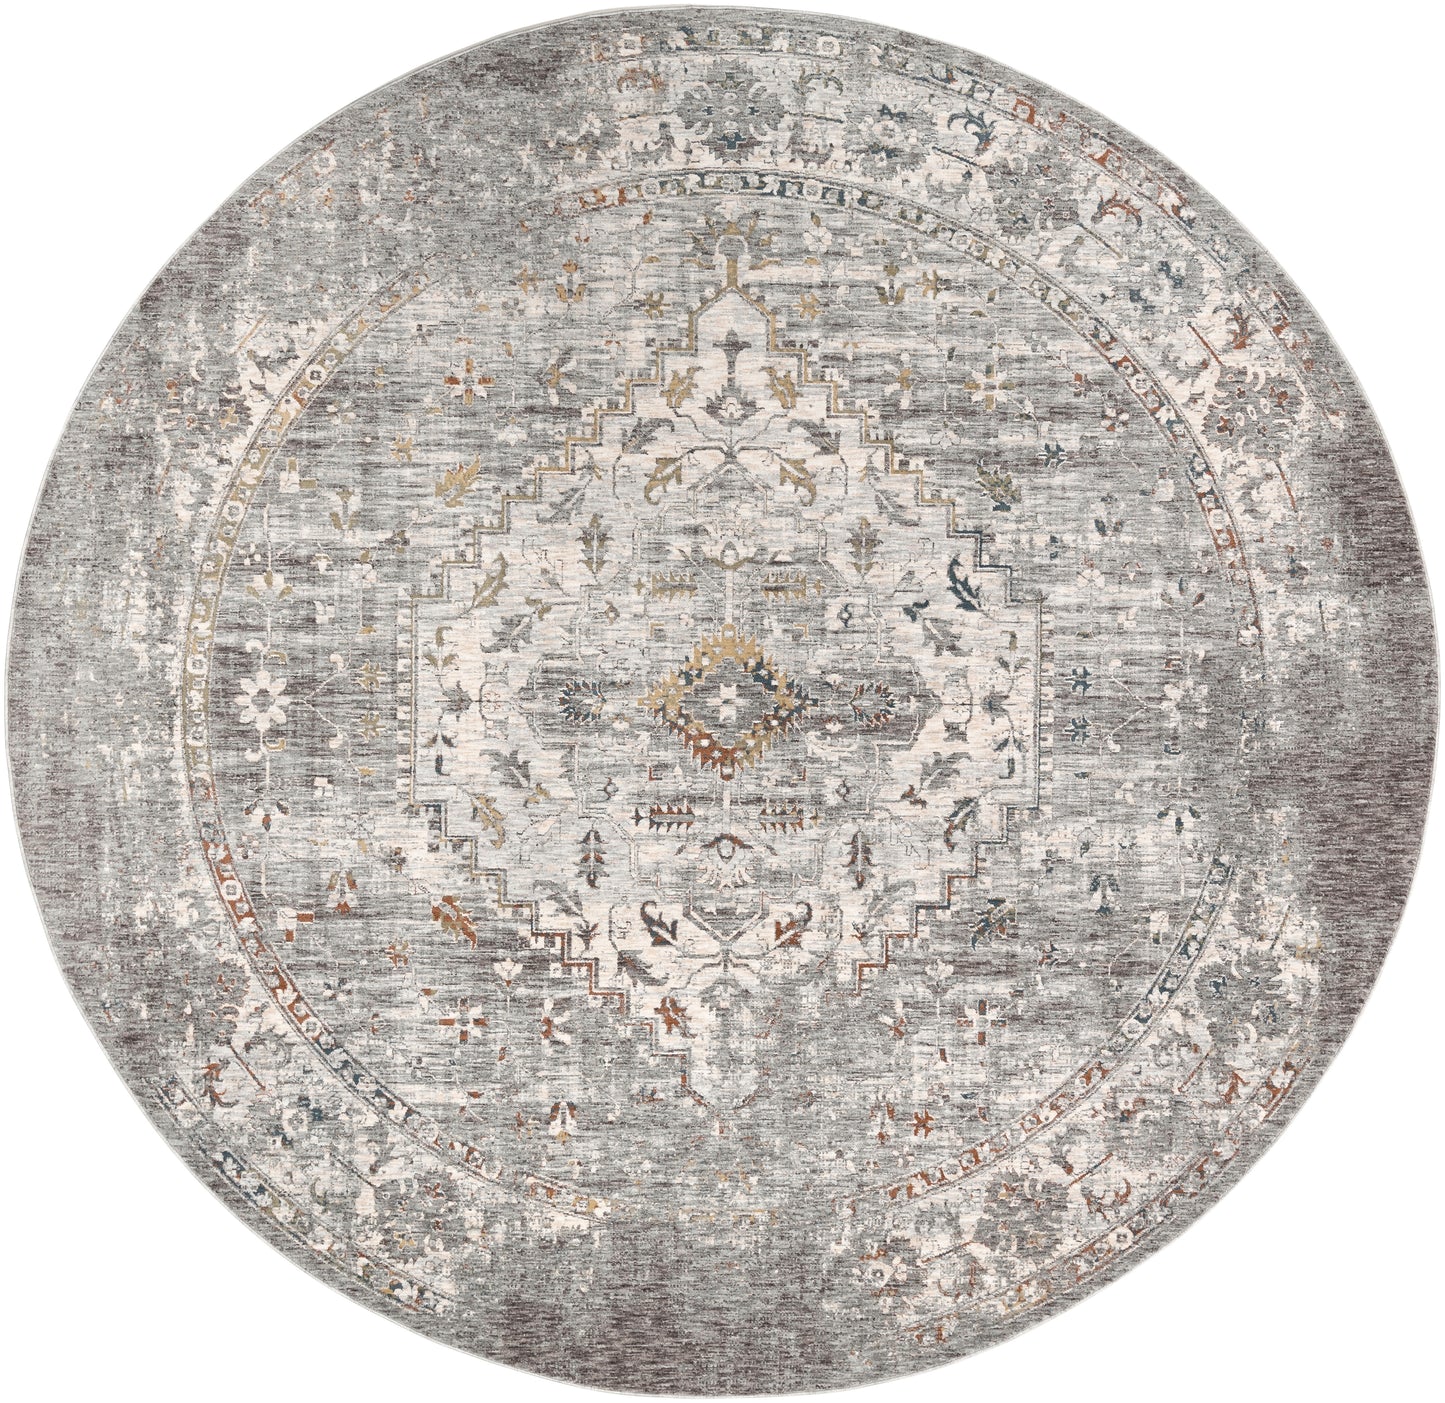 Presidential 22814 Machine Woven Synthetic Blend Indoor Area Rug by Surya Rugs